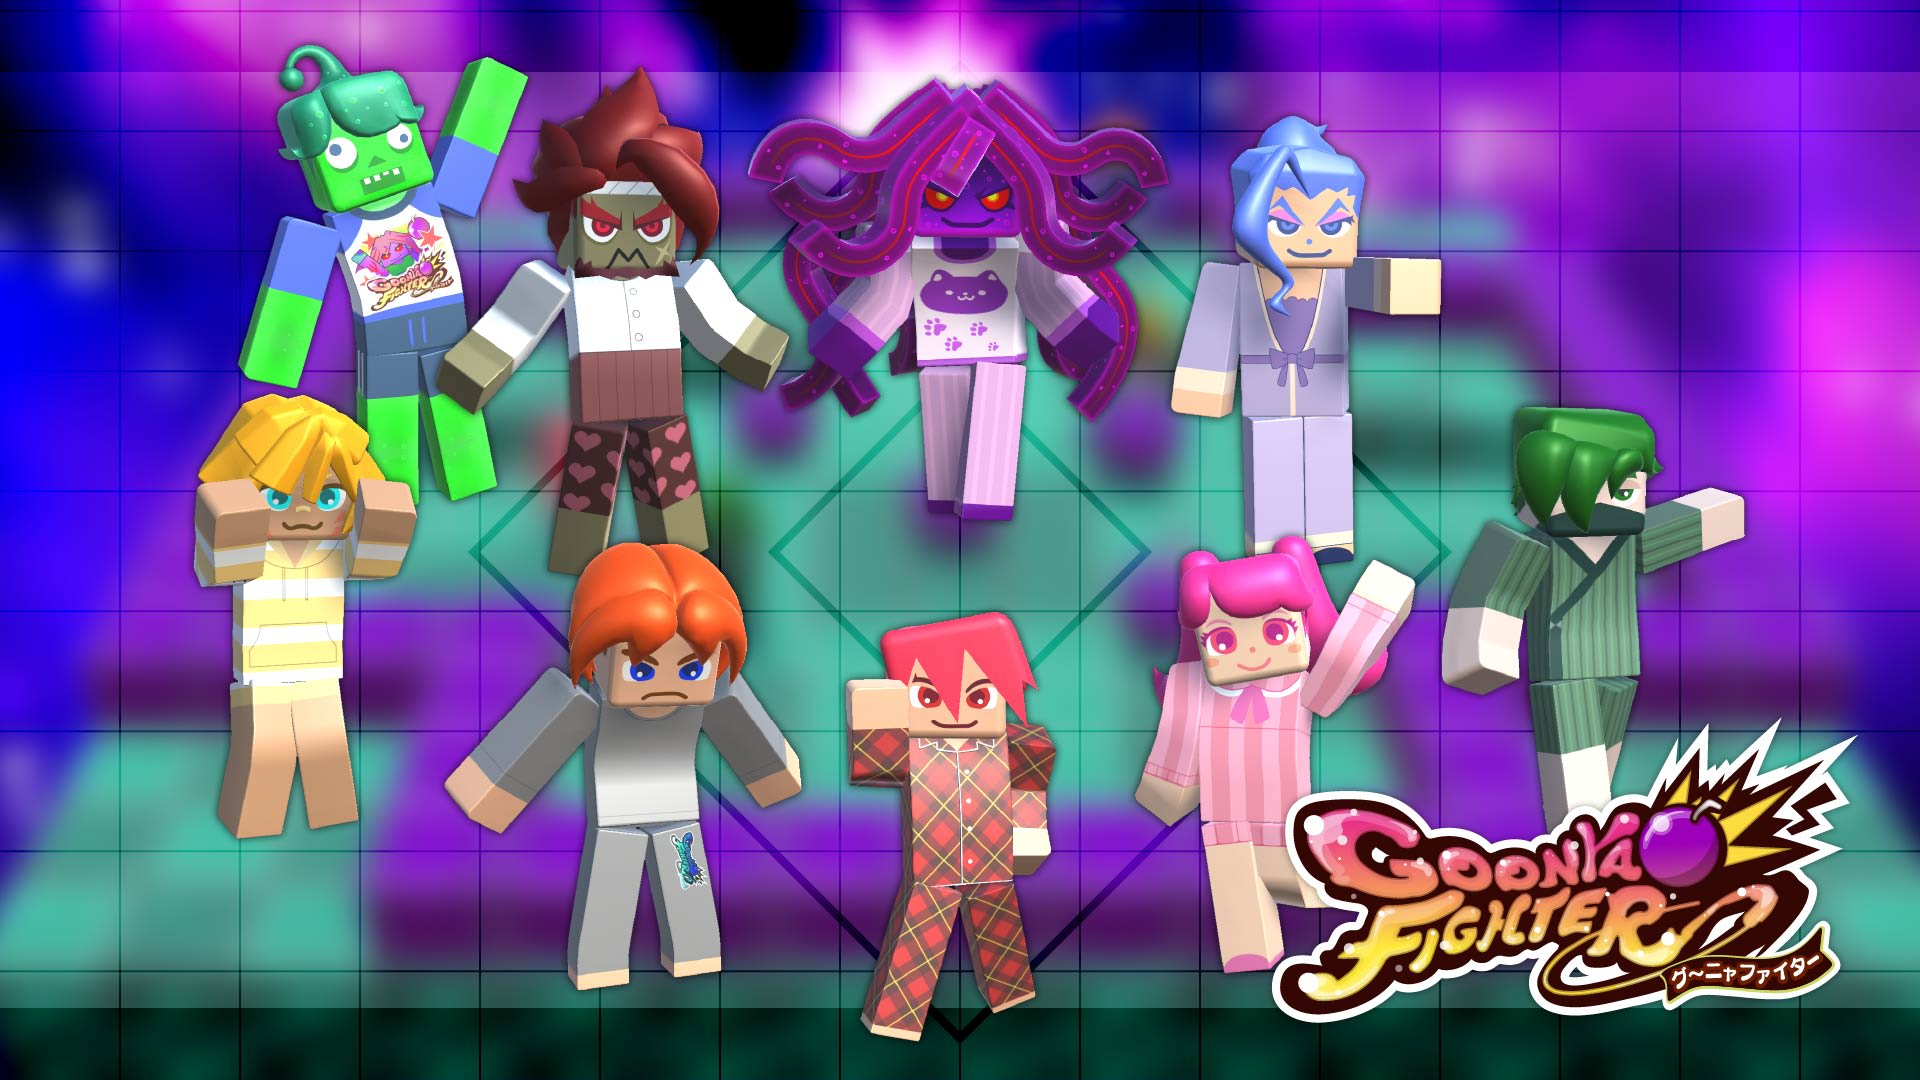 Additional skin: All character skins (pajama Party ver.)